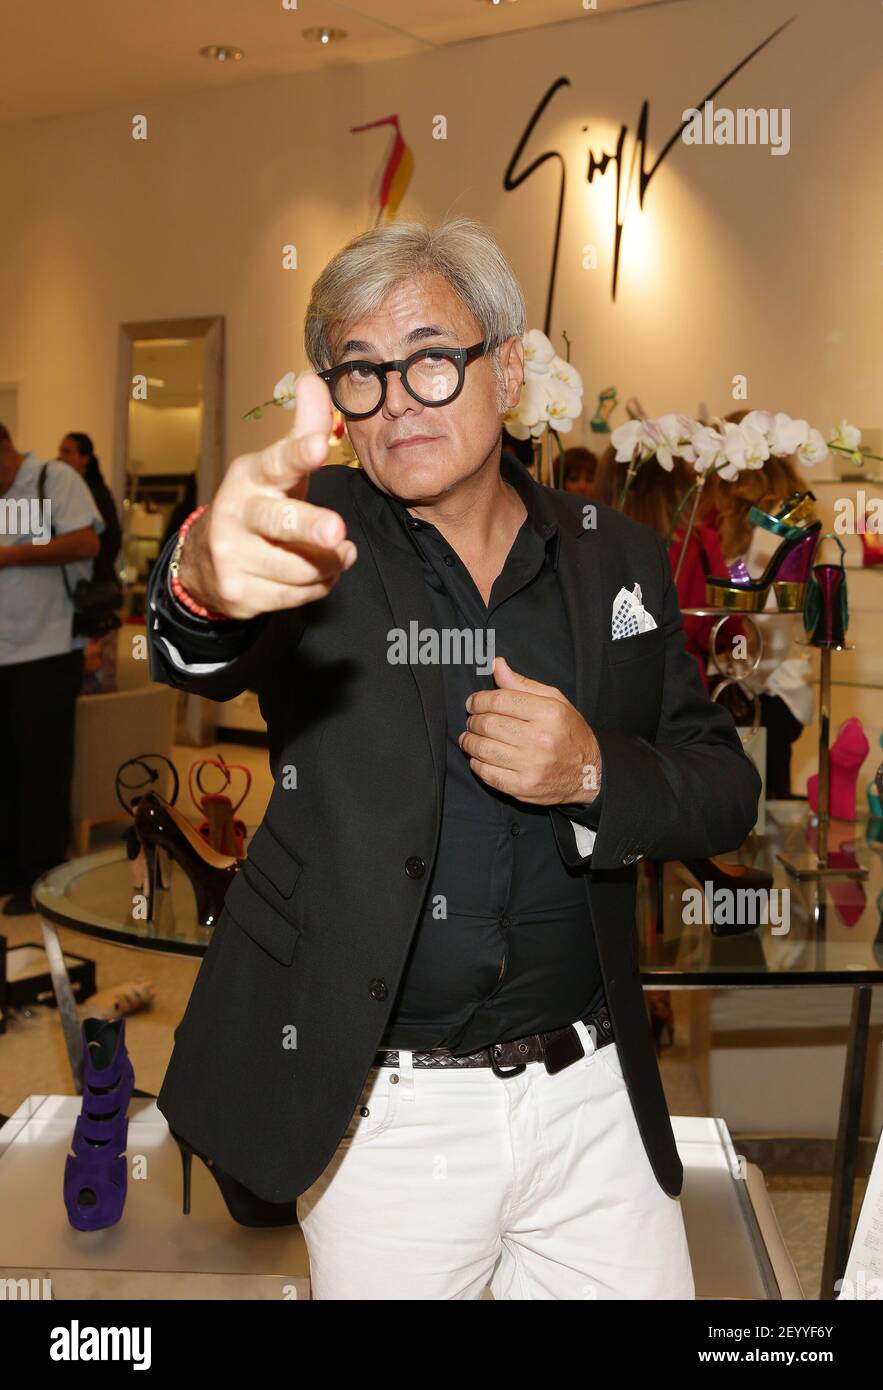 Designer Giuseppe Zanotti - Bal Habour, Florida - A Special afternoon with shoe designer Giuseppe Zanotti at Neiman Marcus in Bal Harbour Shops in Habour, Florida October 11, 2012. Photo